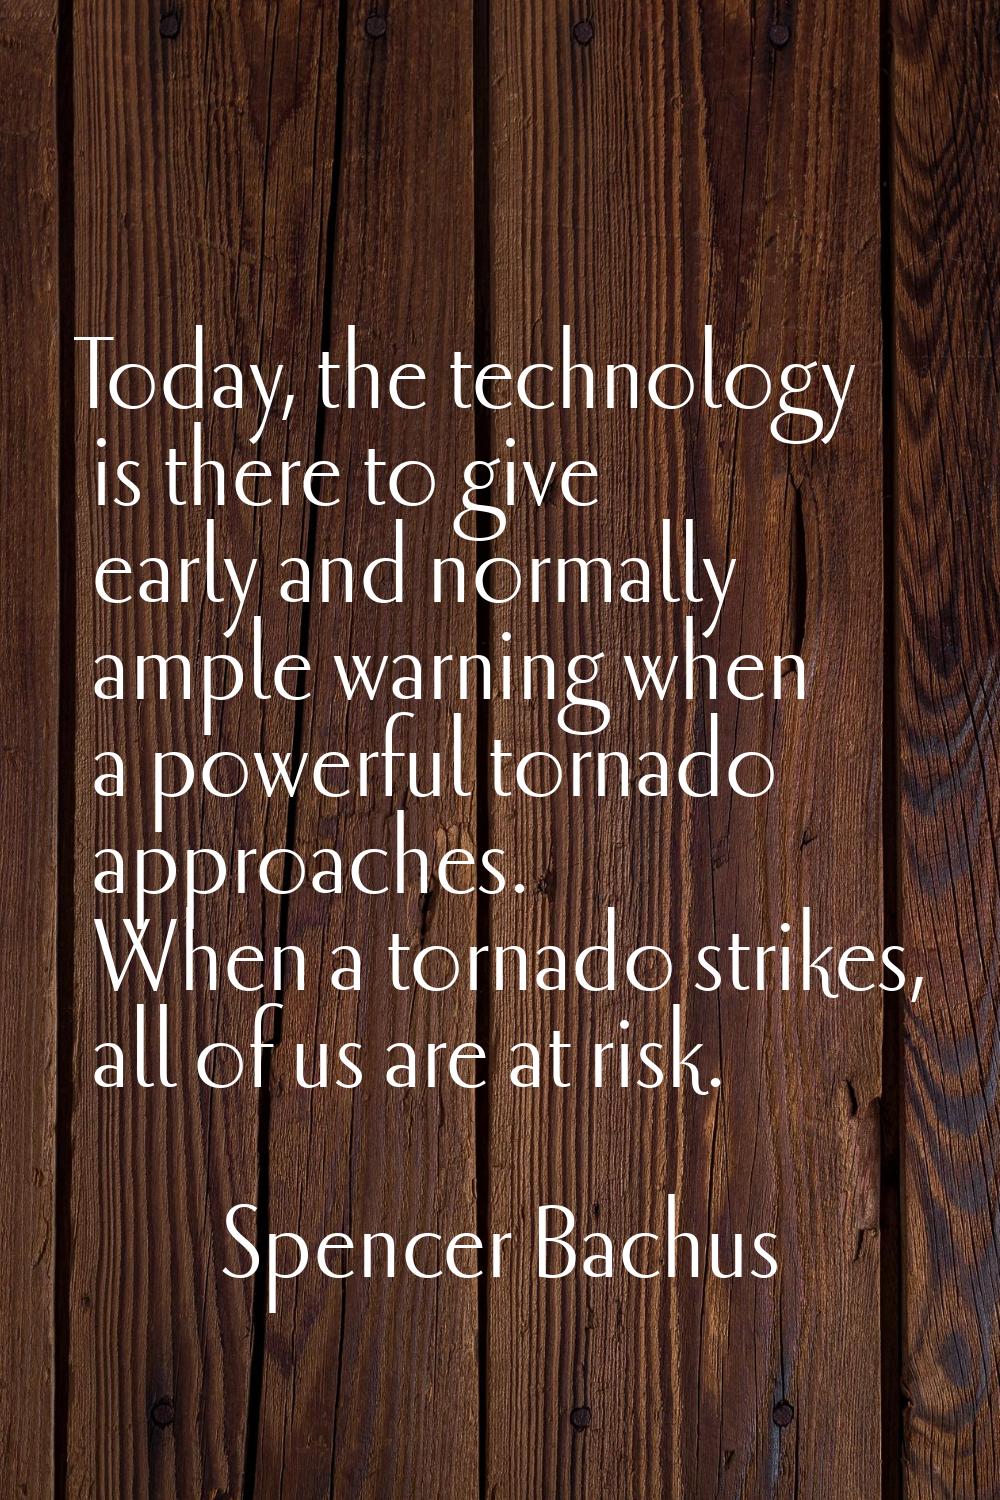 Today, the technology is there to give early and normally ample warning when a powerful tornado app